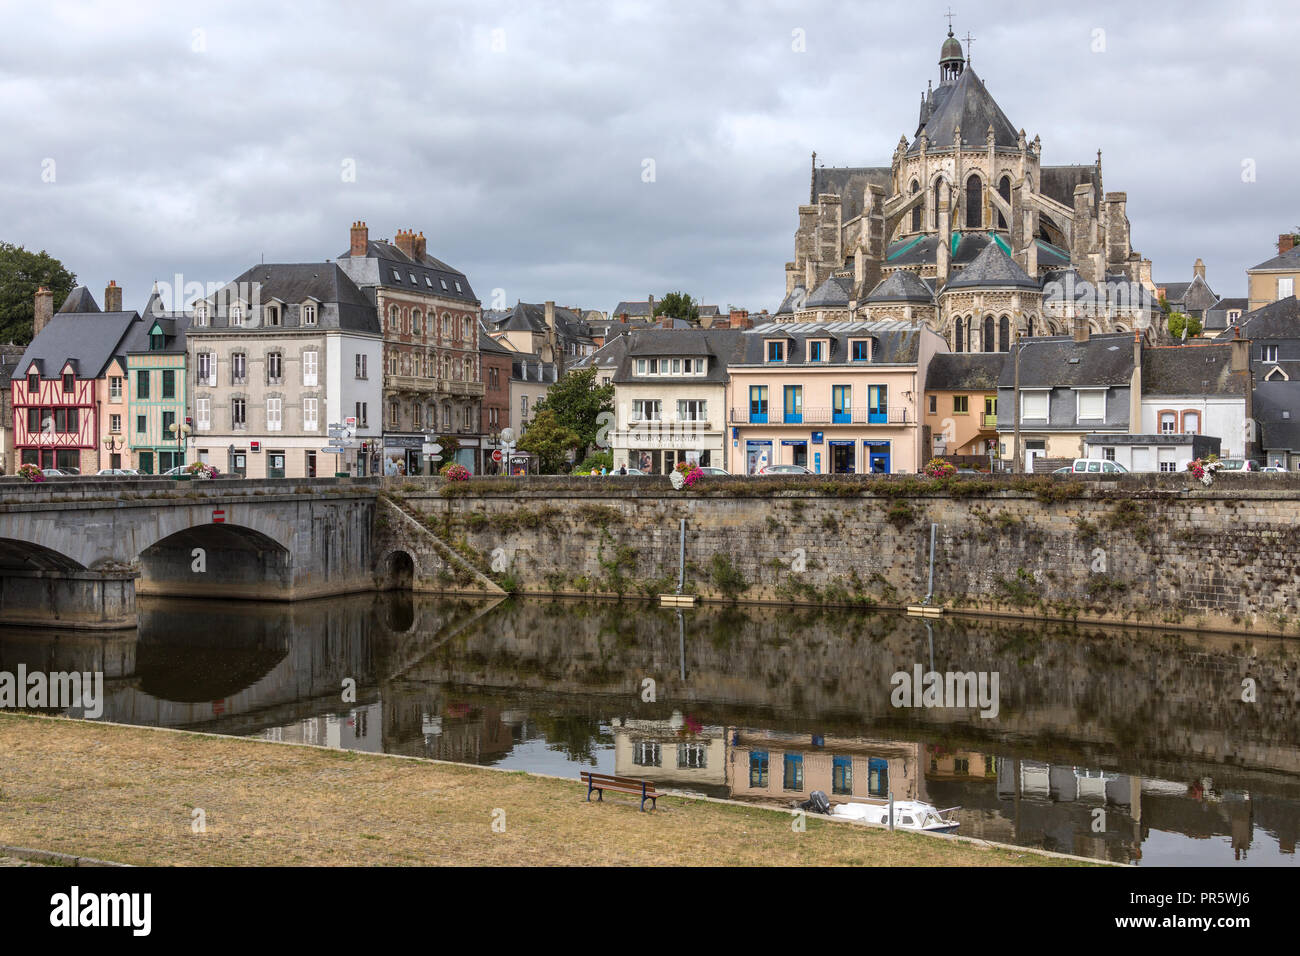 The town of Mayenne in the Pays de la Loire region of northwest France. Named after the Mayenne River which flows through the town. Stock Photo